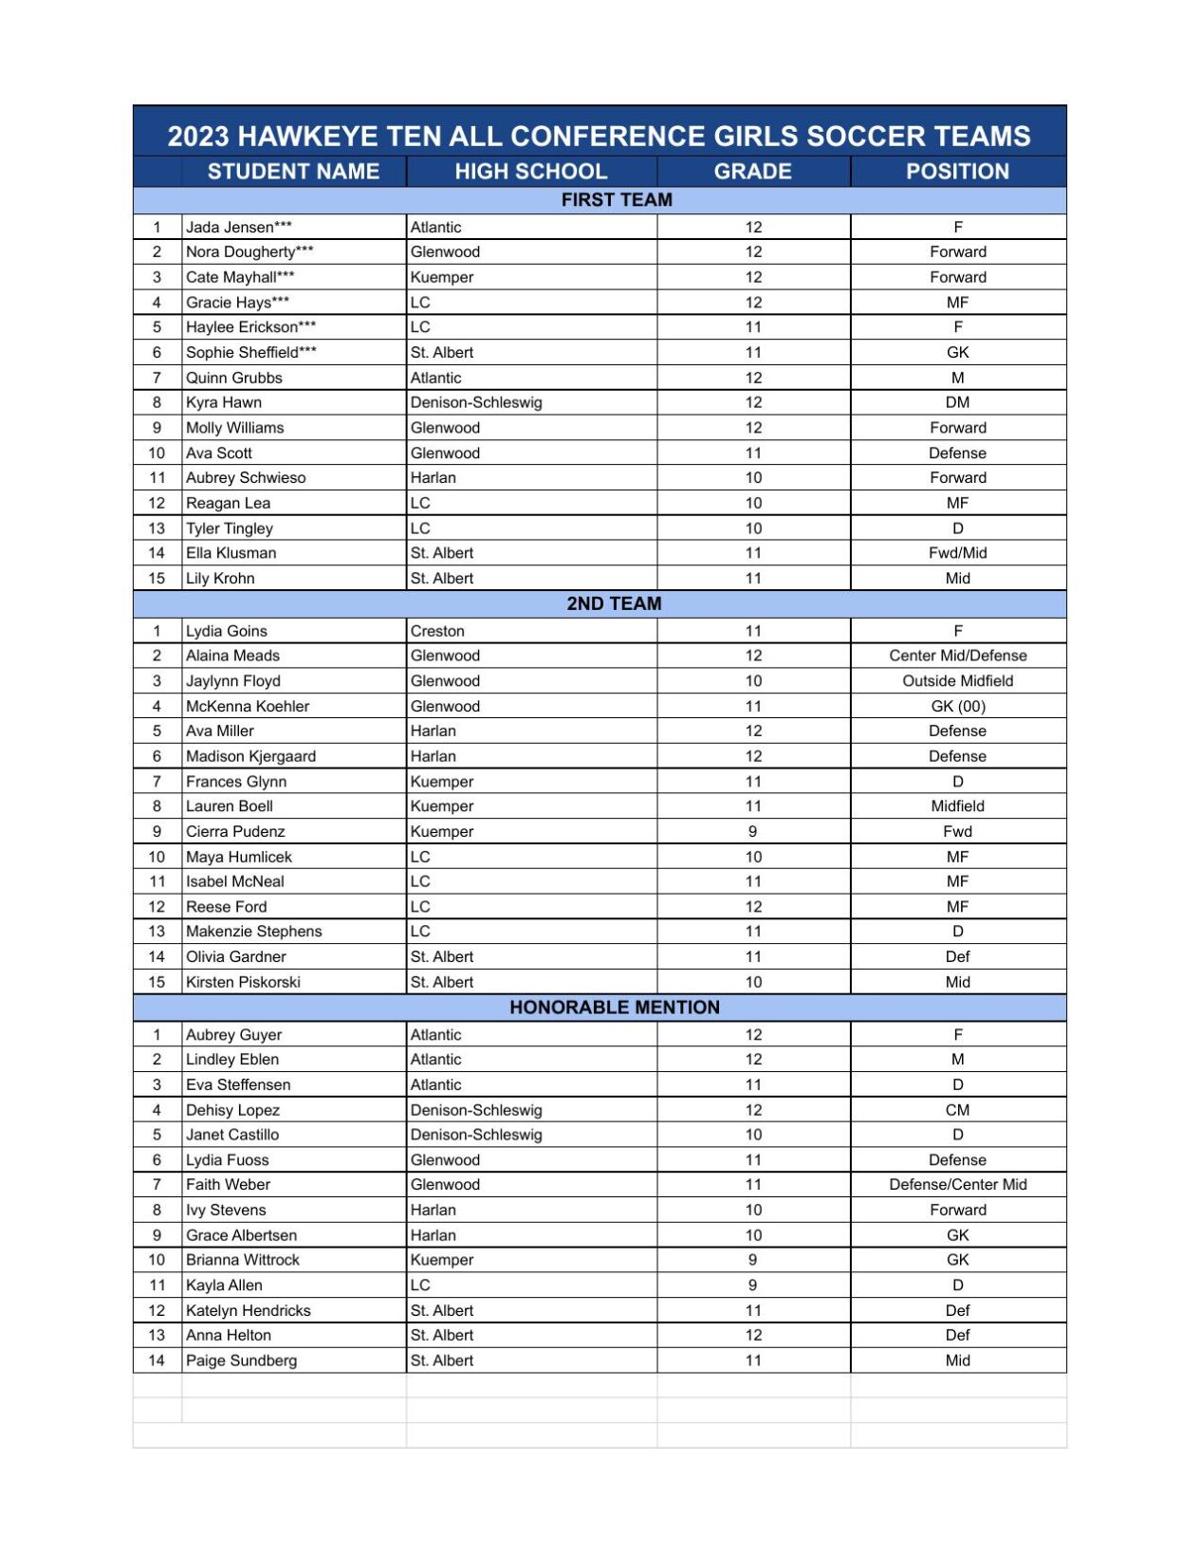 Copy of 2023 H10 ALL CONFERENCE GIRLS SOCCER TEAM - 2023 All Conference Selections .pdf